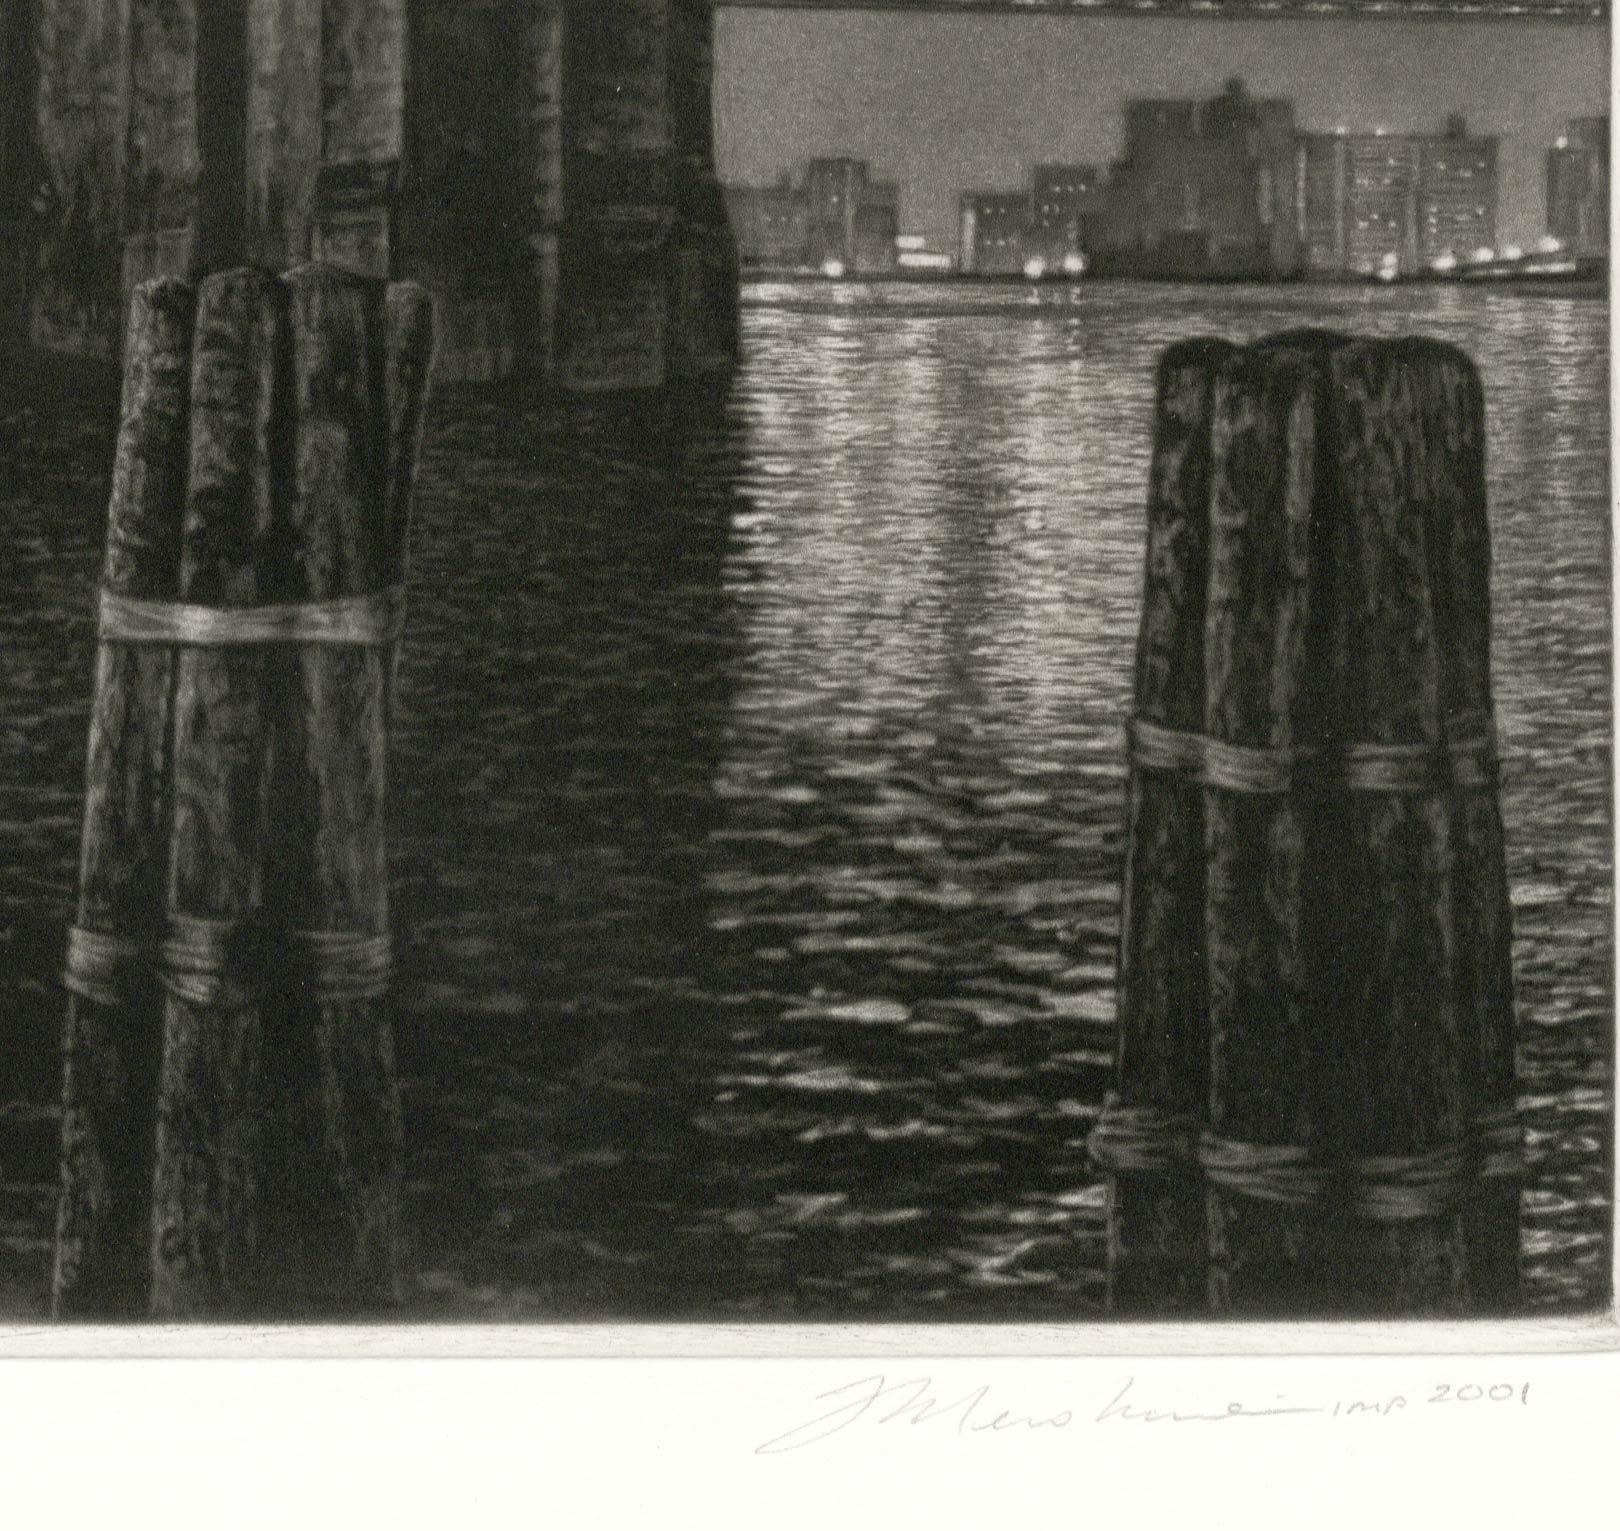 Pylon (Brooklyn Bridge from Manhattan side of East River near South St. Seaport) - Contemporary Print by Frederick Mershimer